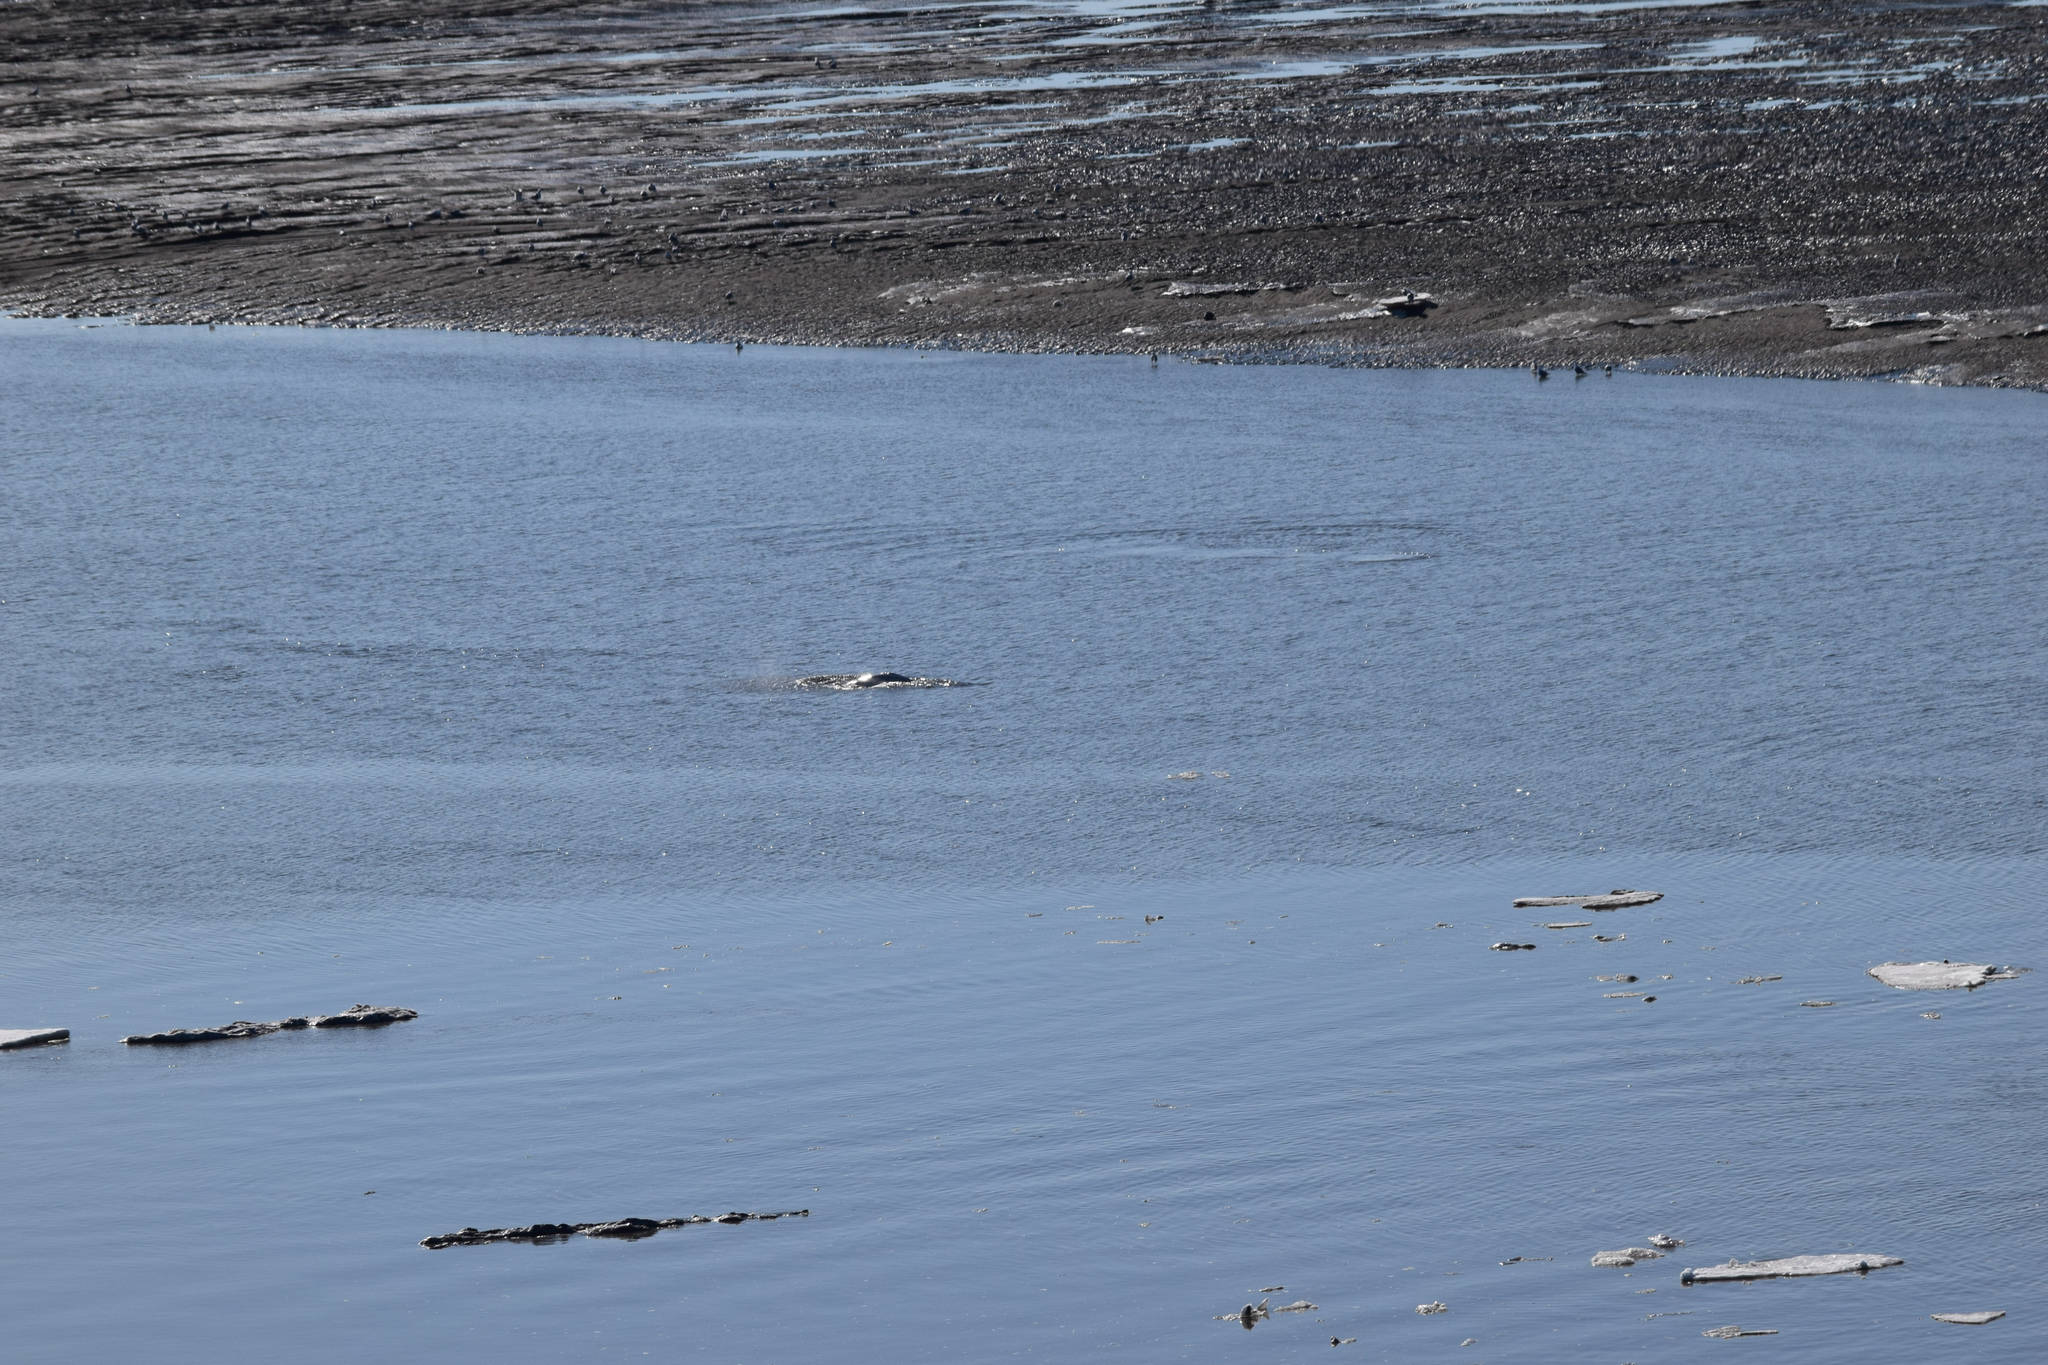 A beluga whale surfaces in the Kenai River at Cunningham Park on Saturday, April 24, 2021. (Photo by Camille Botello/Peninsula Clarion)